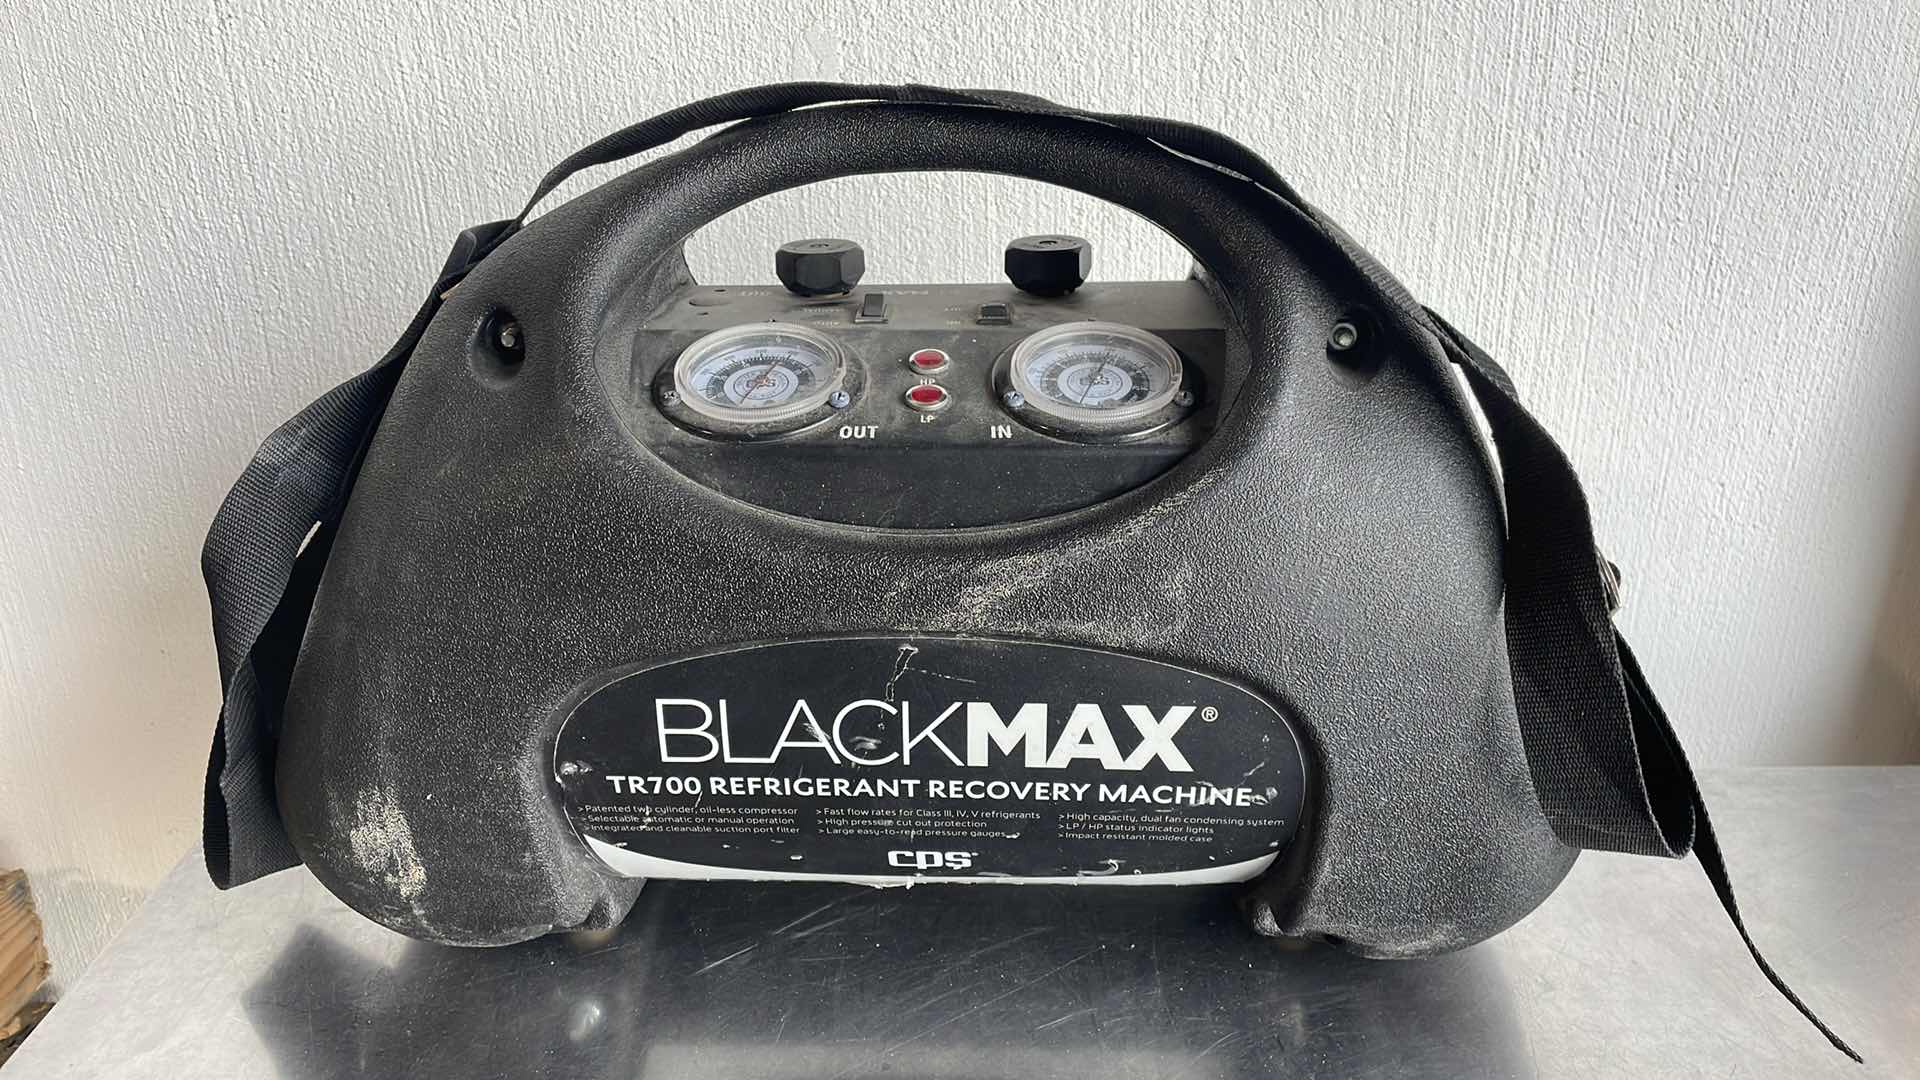 CPS BLACKMAX TR700 REFRIGERANT RECOVERY MACHINE POWERS ON ABLE ABLE TO TEST